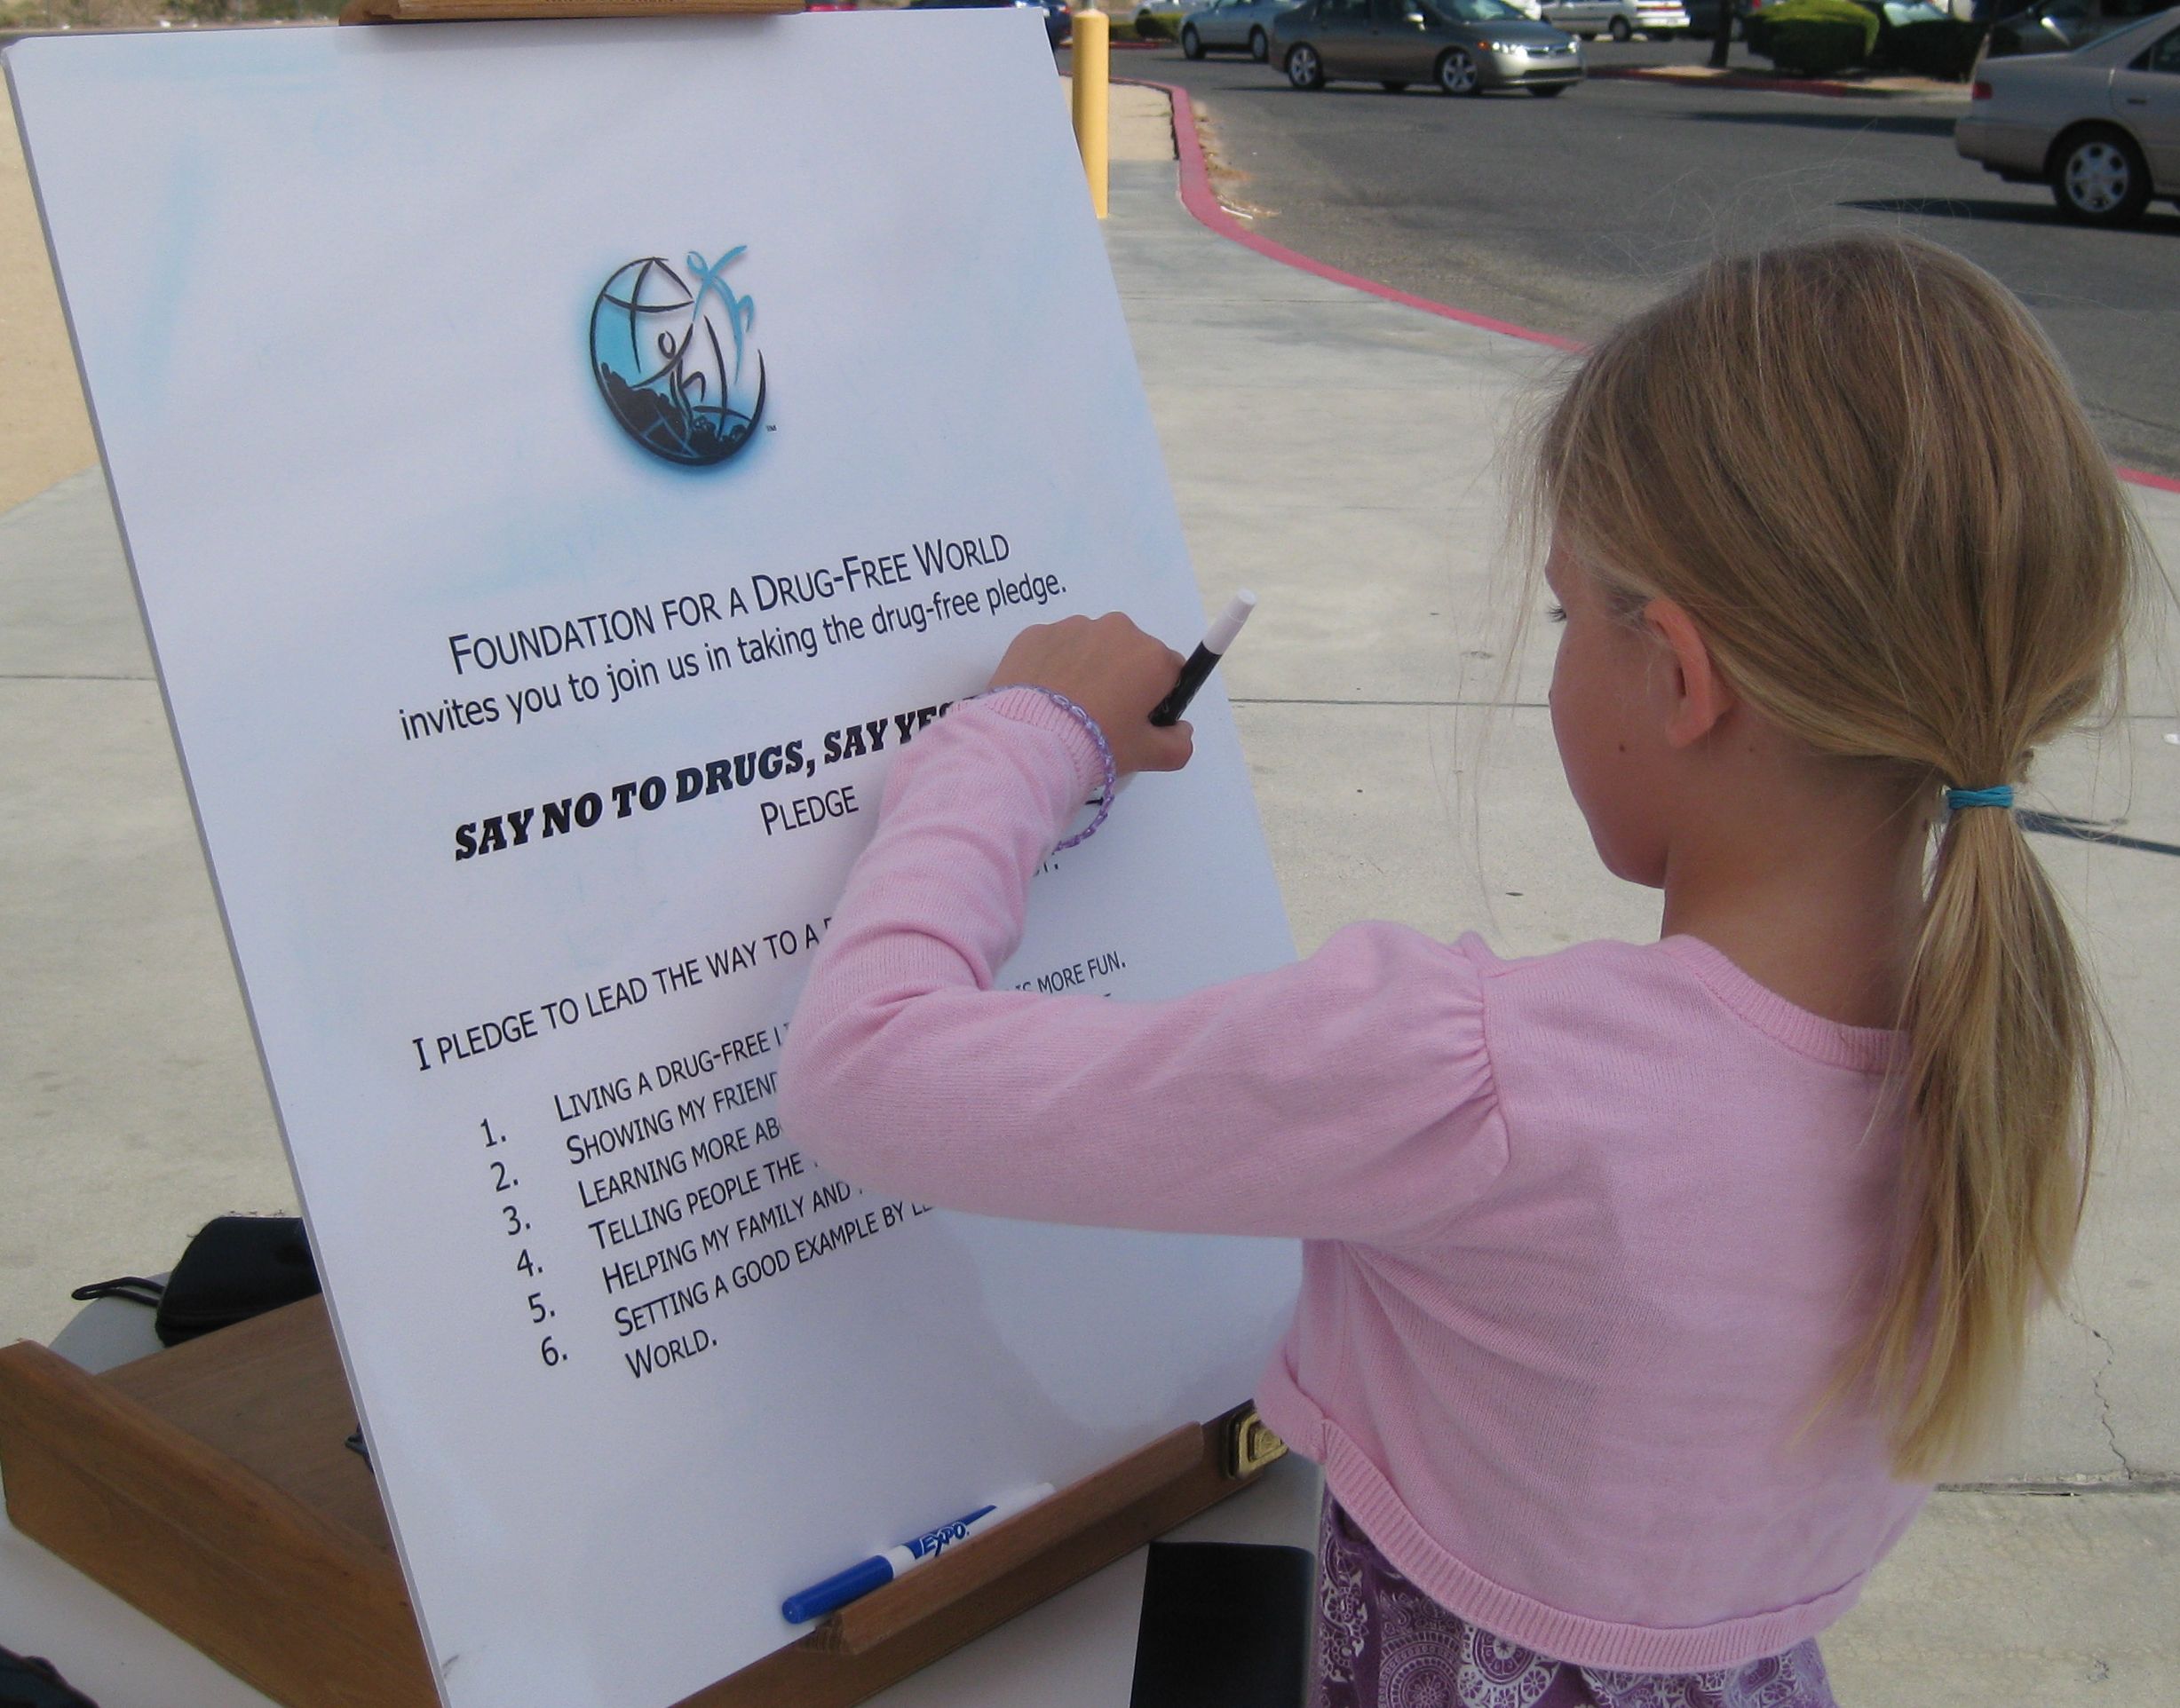 Youngster signs the drug-free pledge at a Truth About Drugs drug education booth in October 2013, in Randsburg, California.